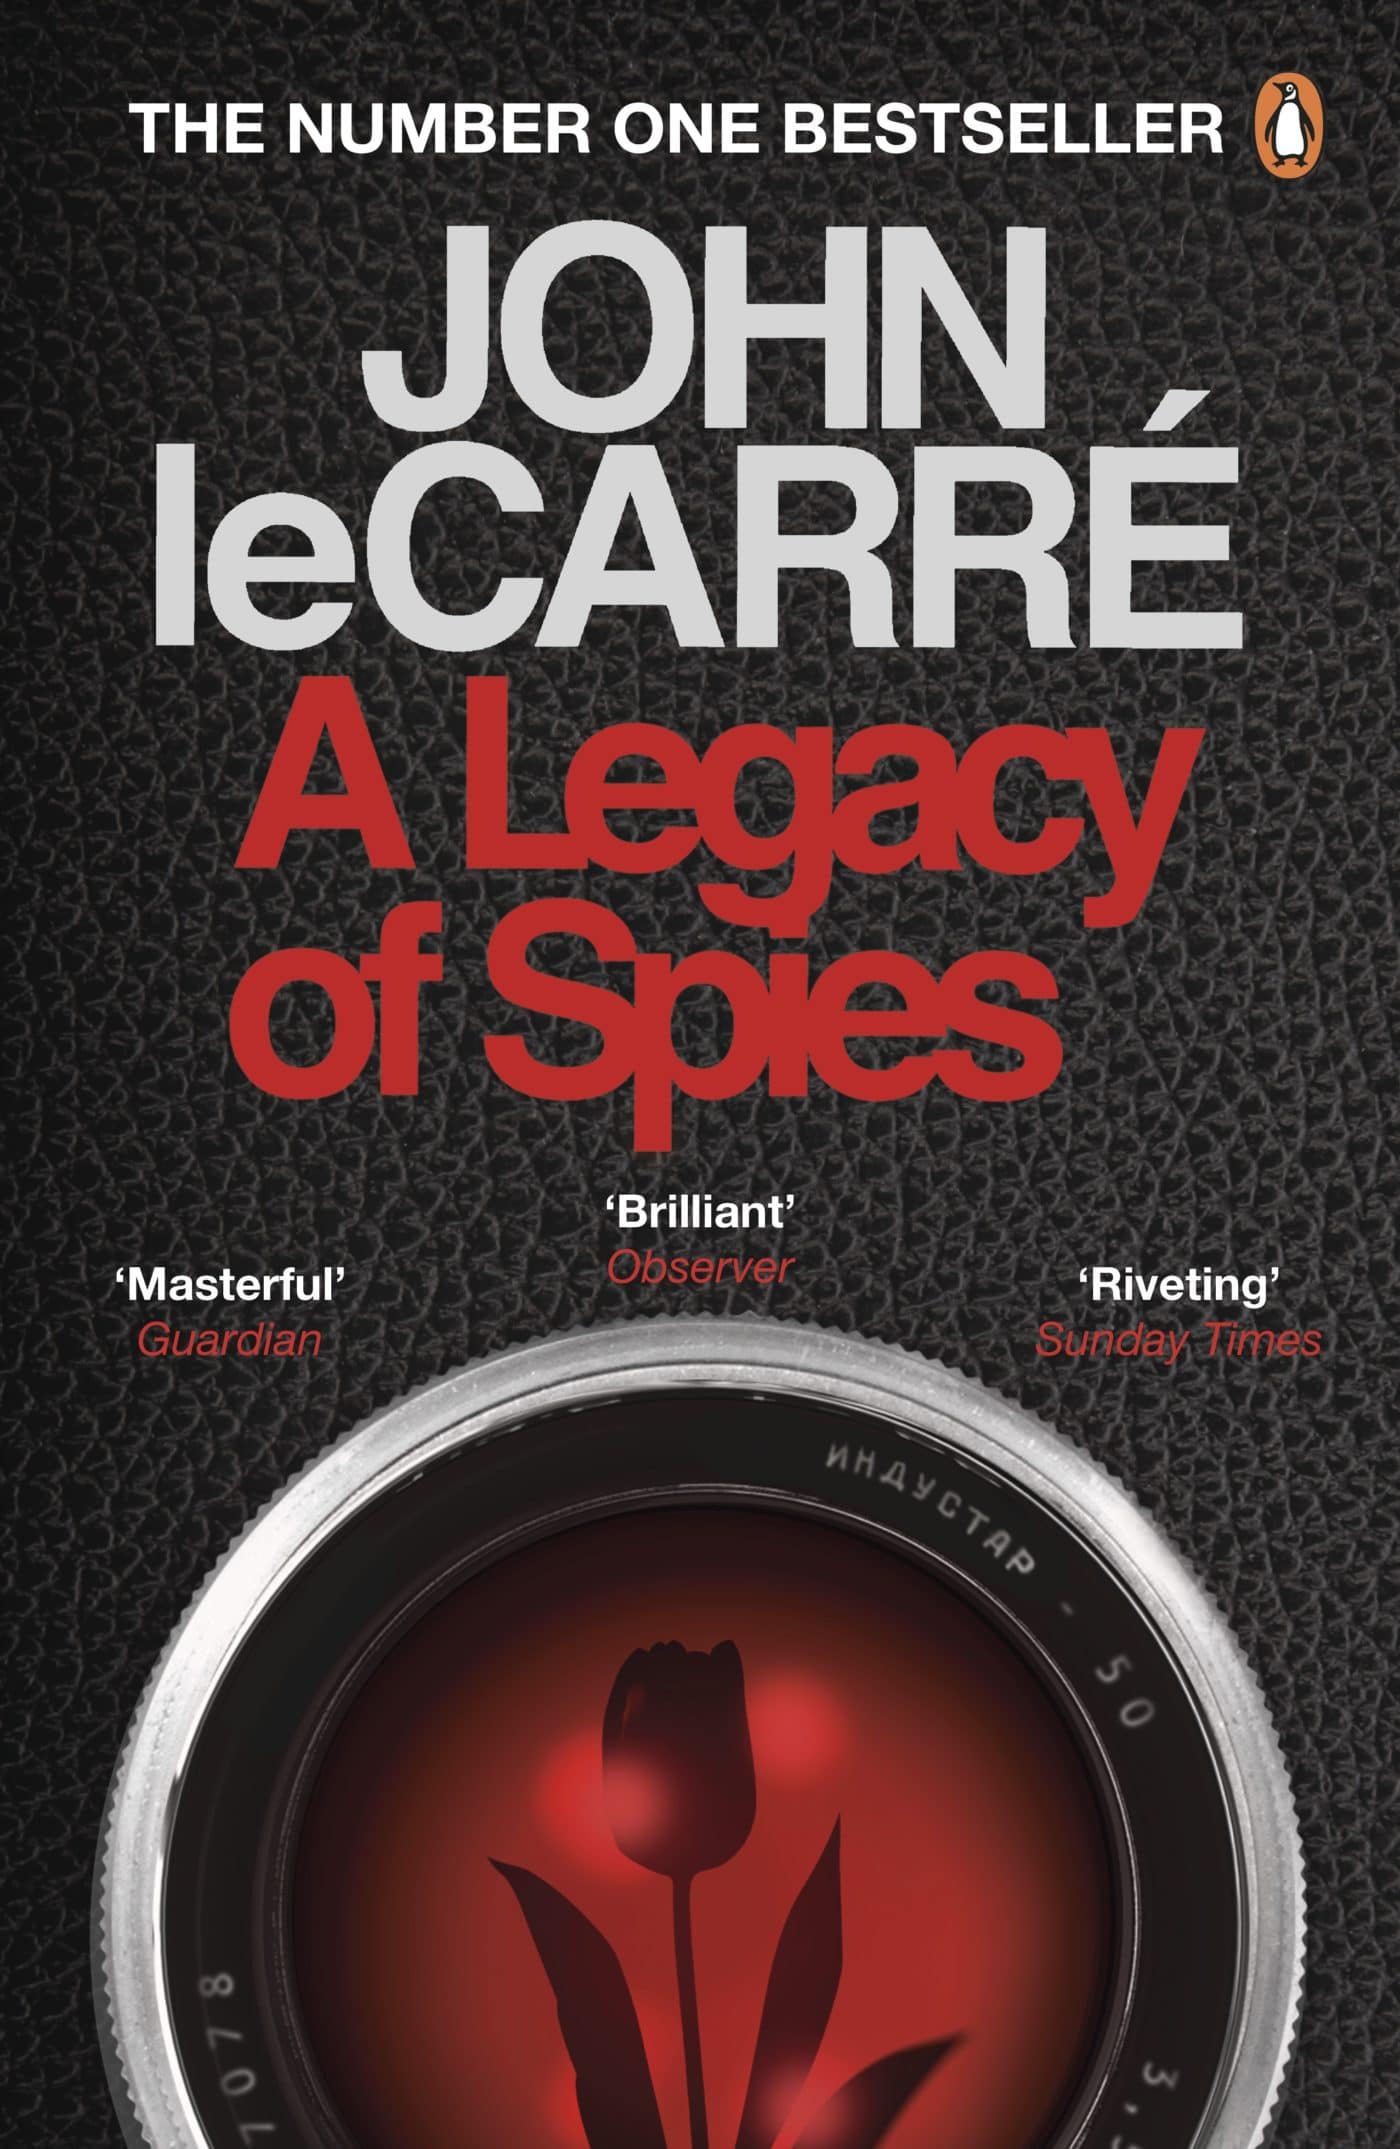 A Legacy of Spies by John le Carré, the latest George Smiley book